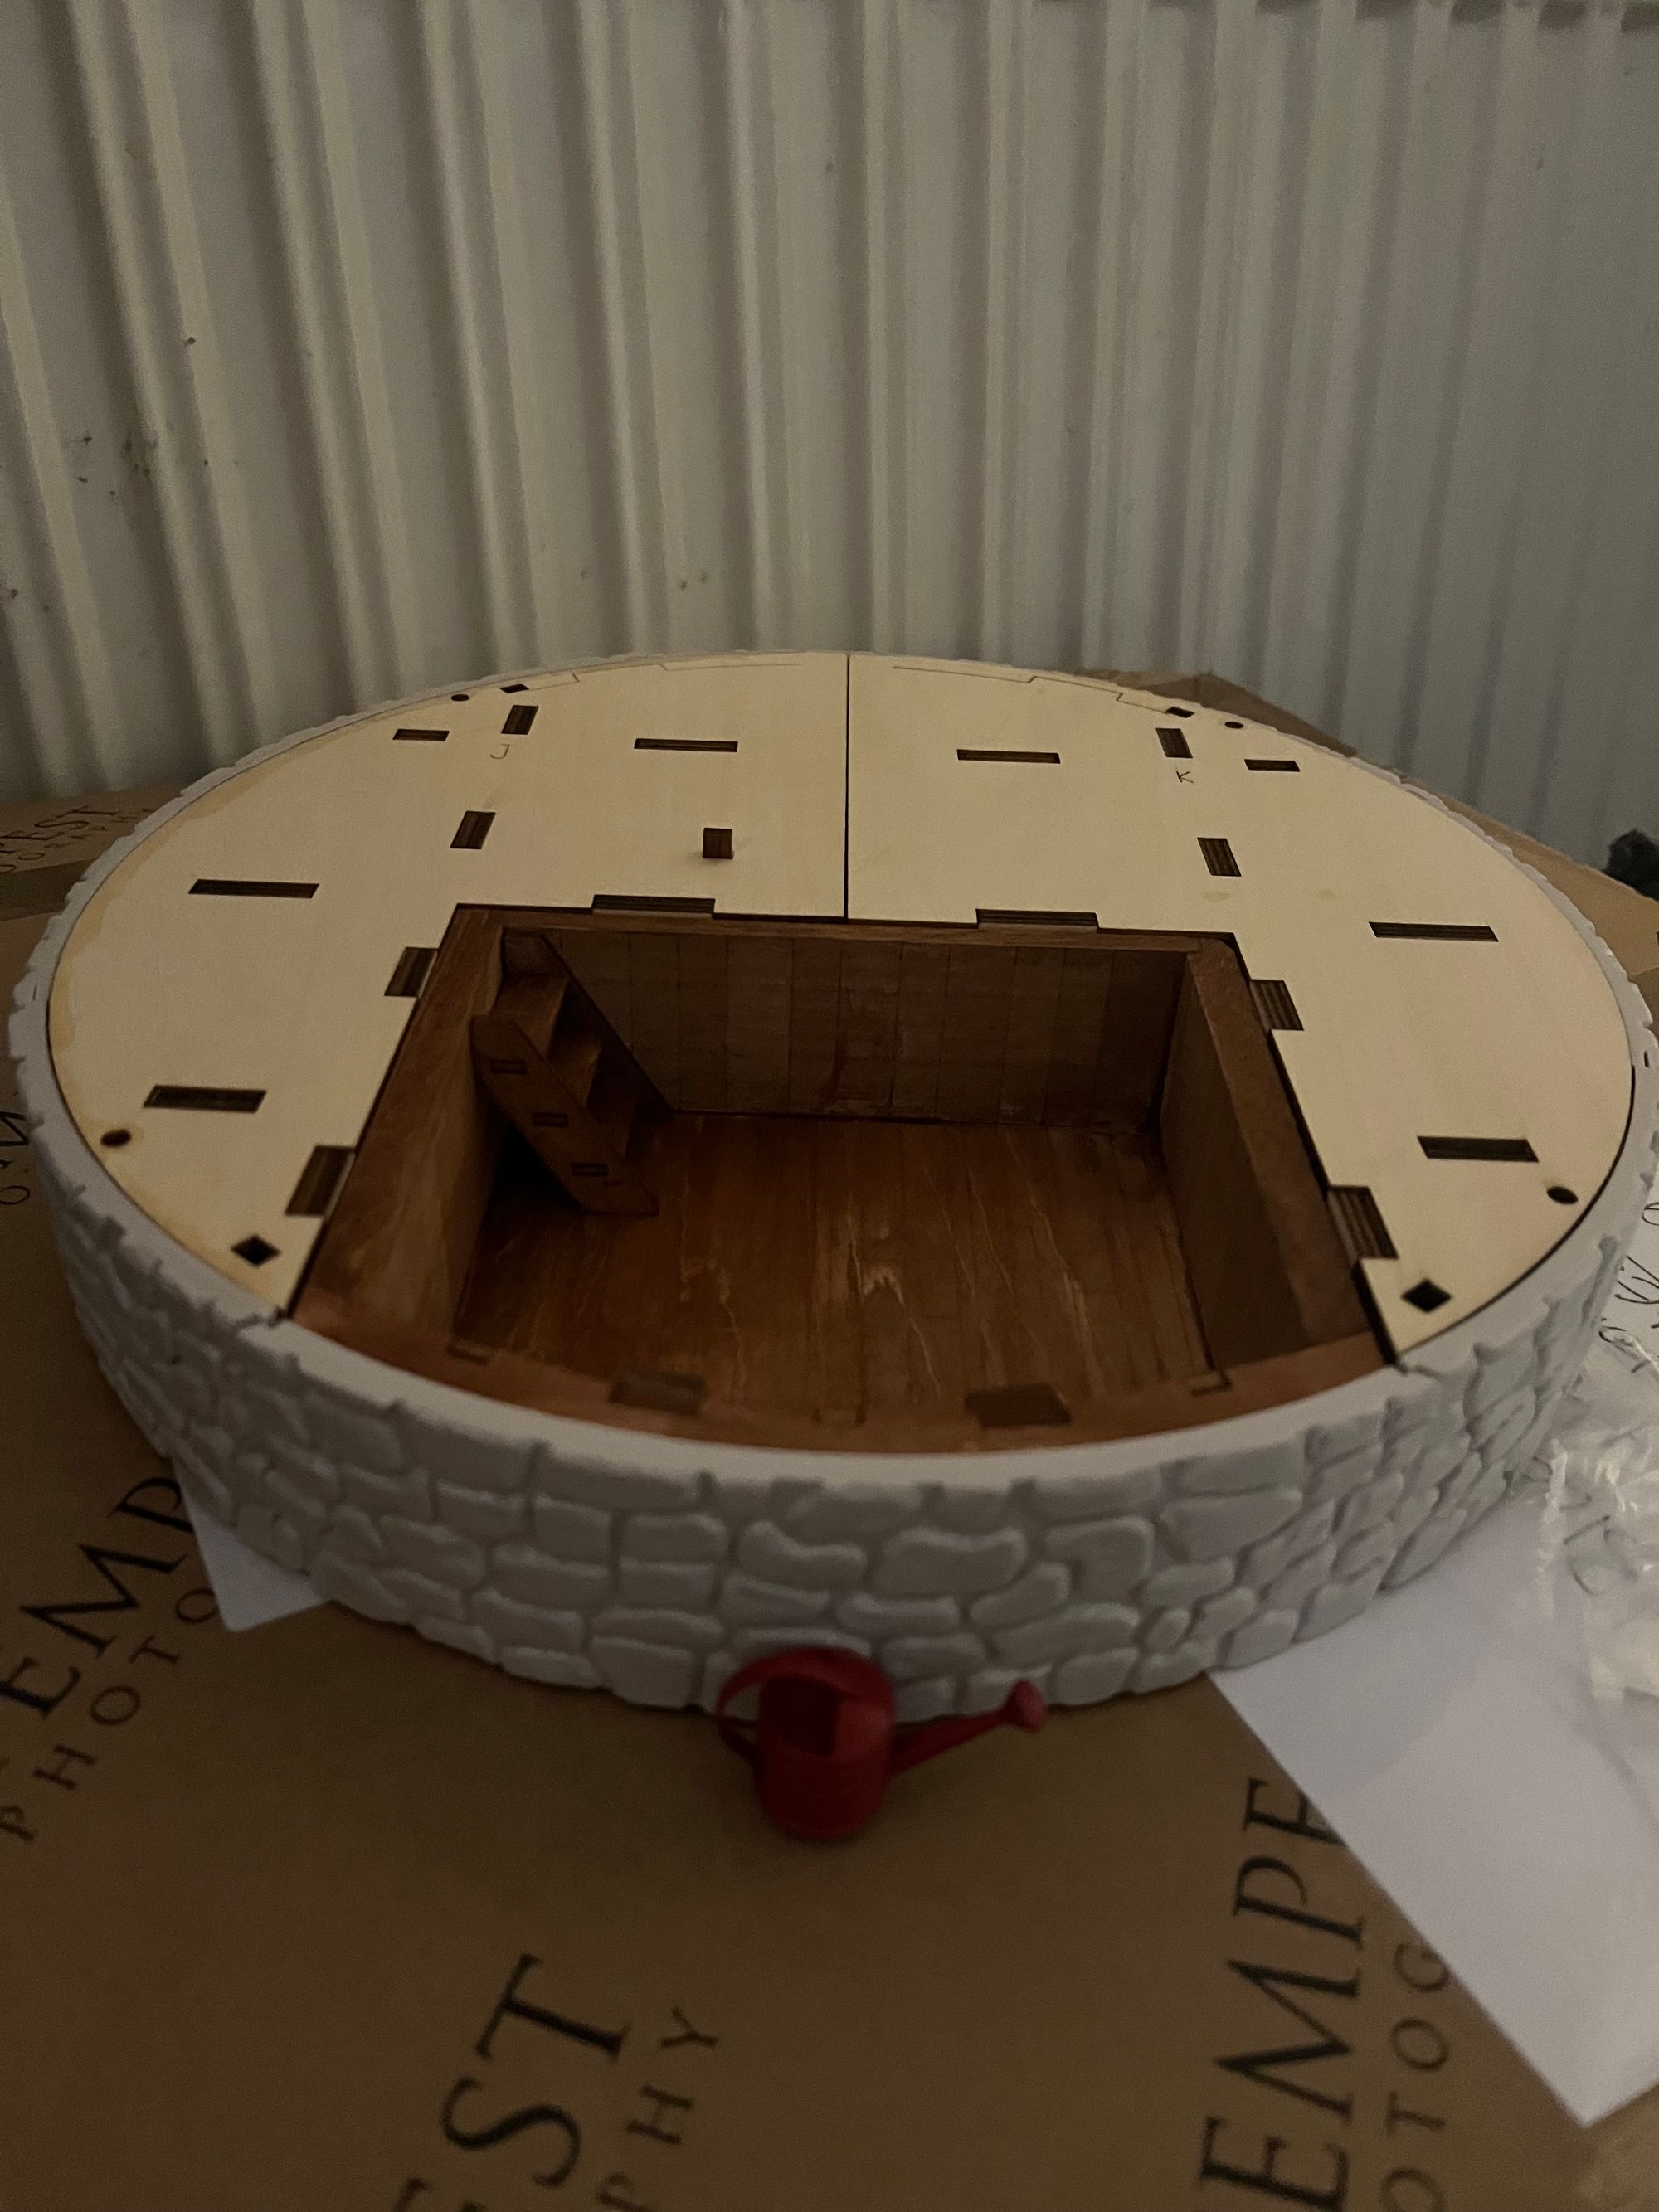 A circular basement with a drawer opened with a small red watering can.